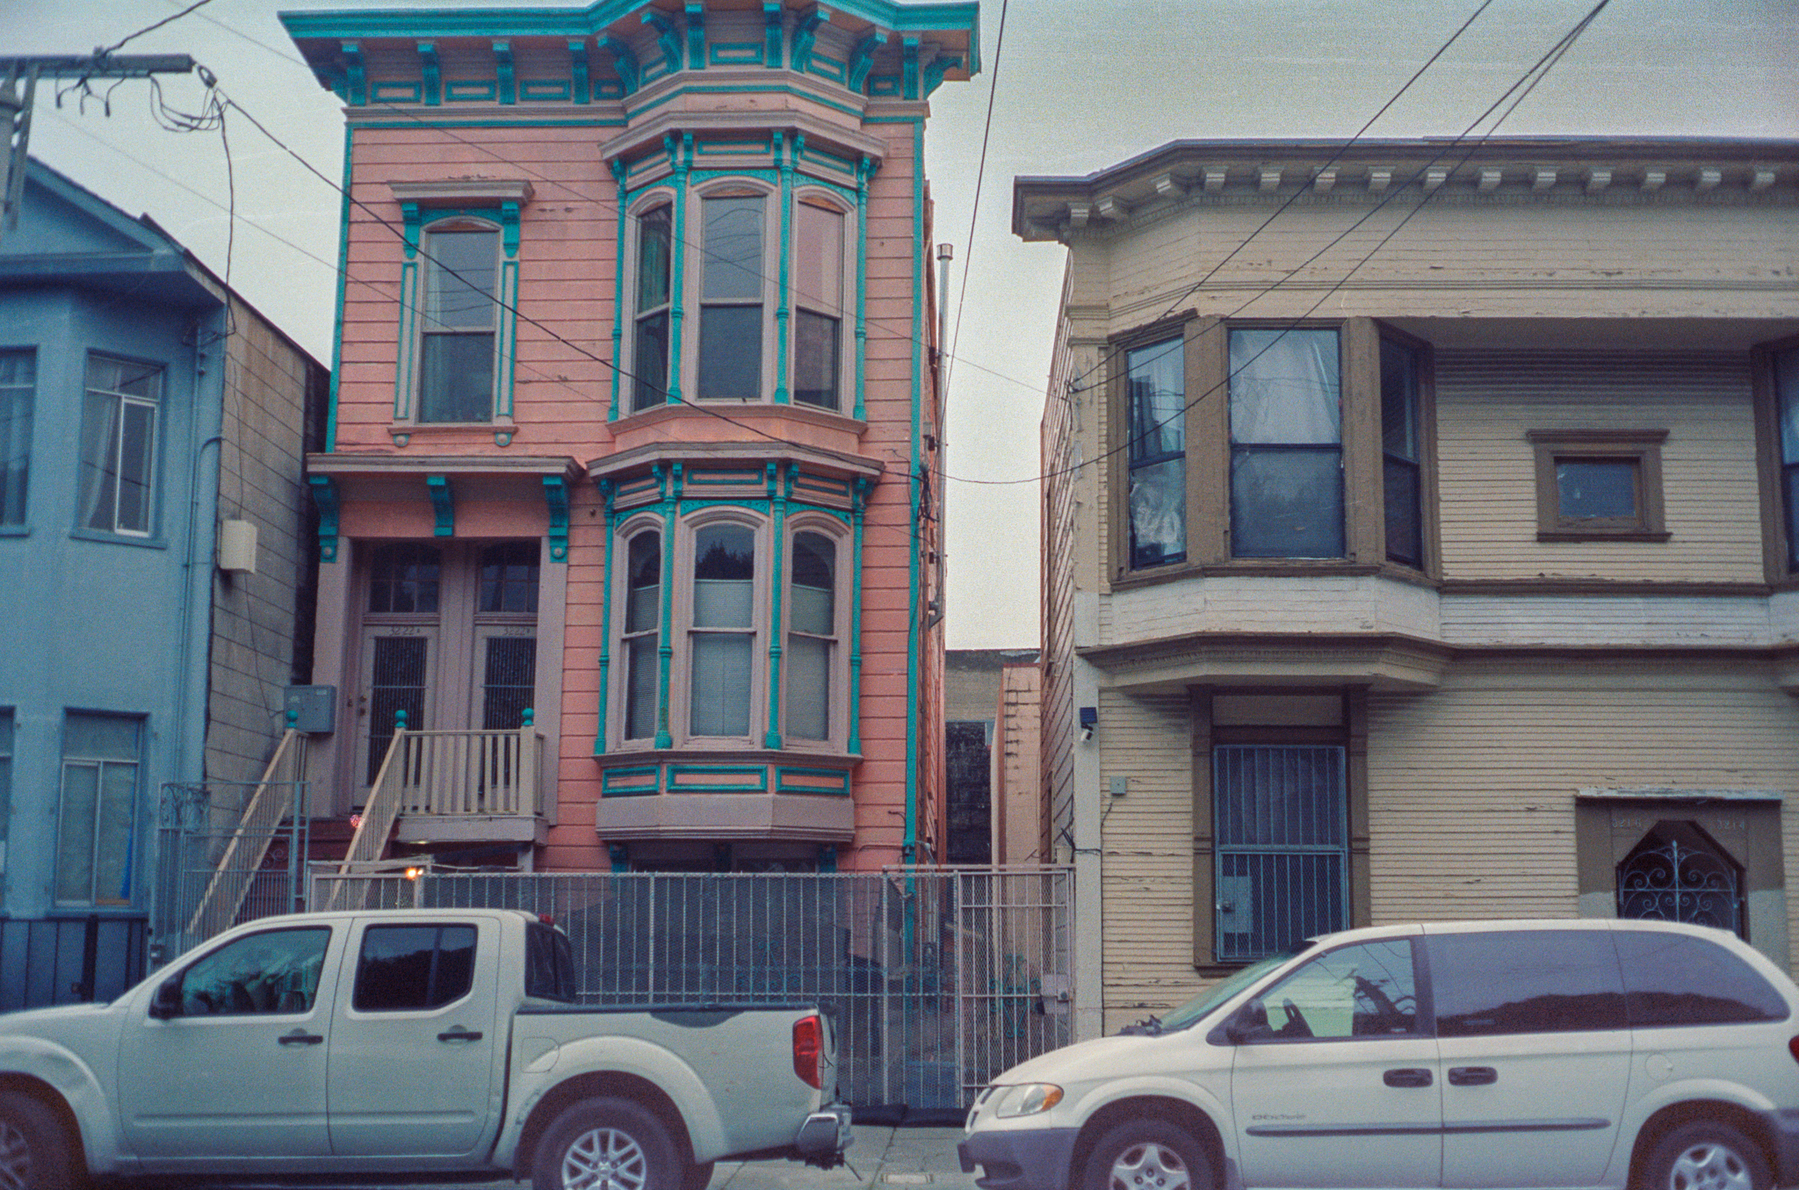 a scan of a color photograph of a pink and blue Victorian building on a street in San Francisco with two cars parked in front of it, and a yellow building next to it